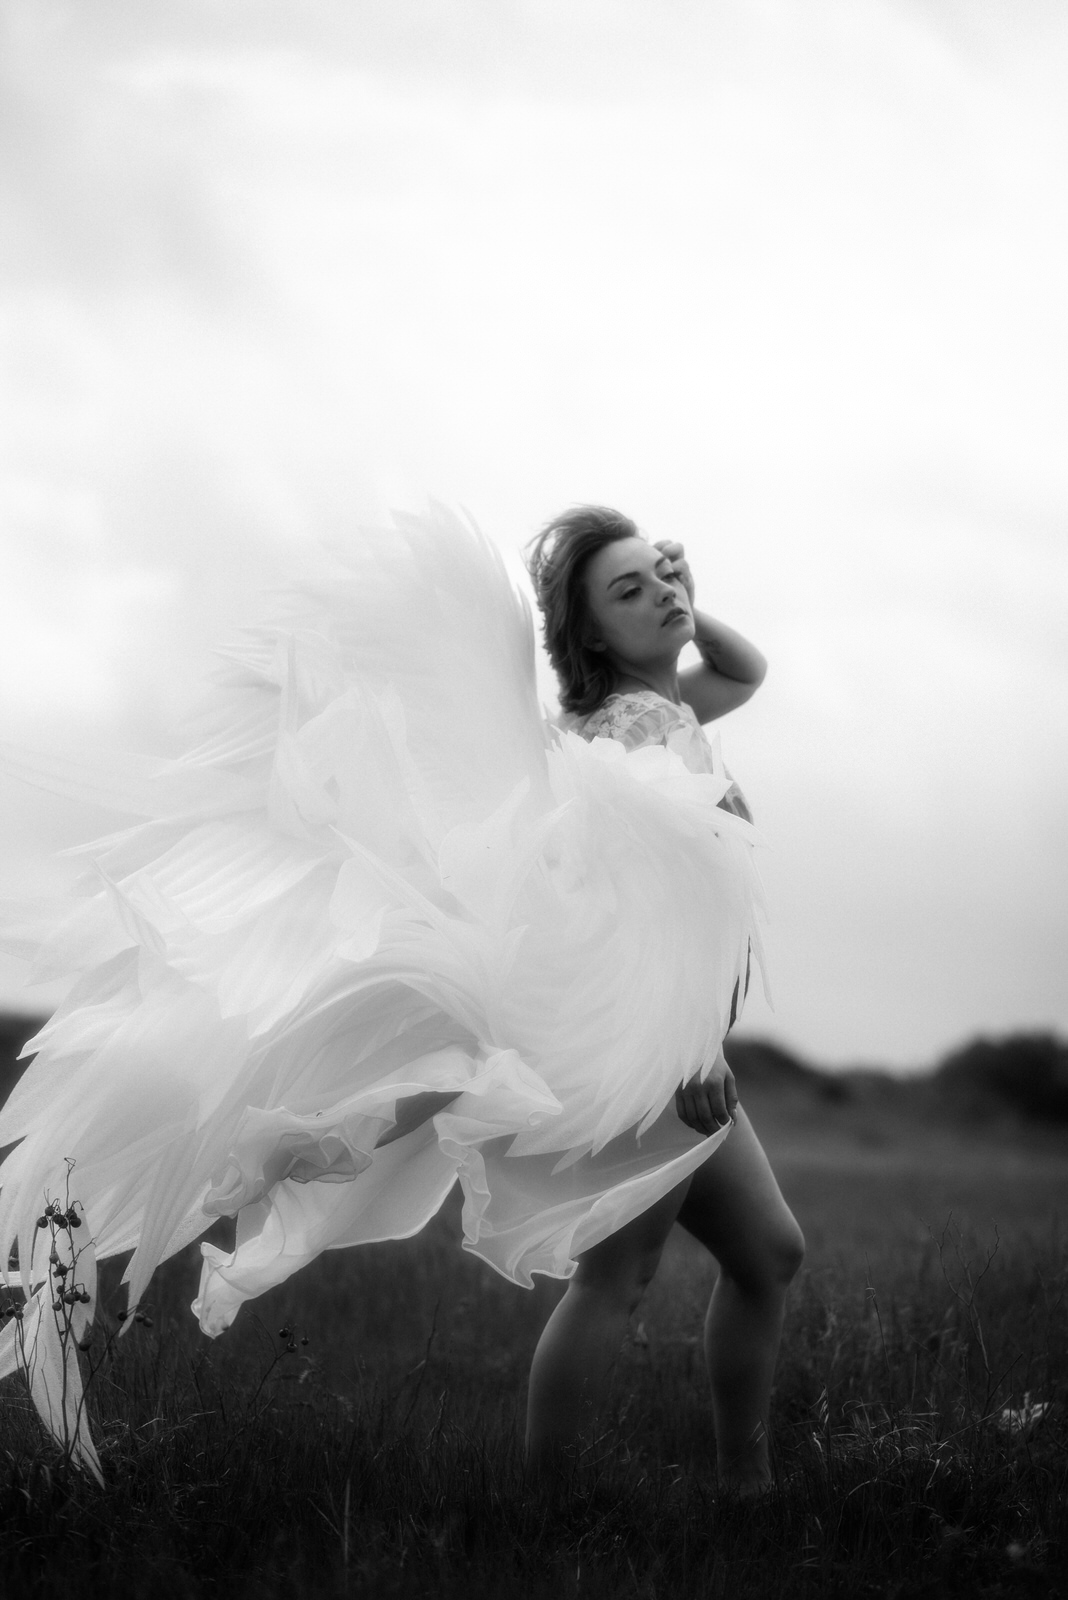 Artistic angel wing photoshoot by Royal Lune Photo in Texas